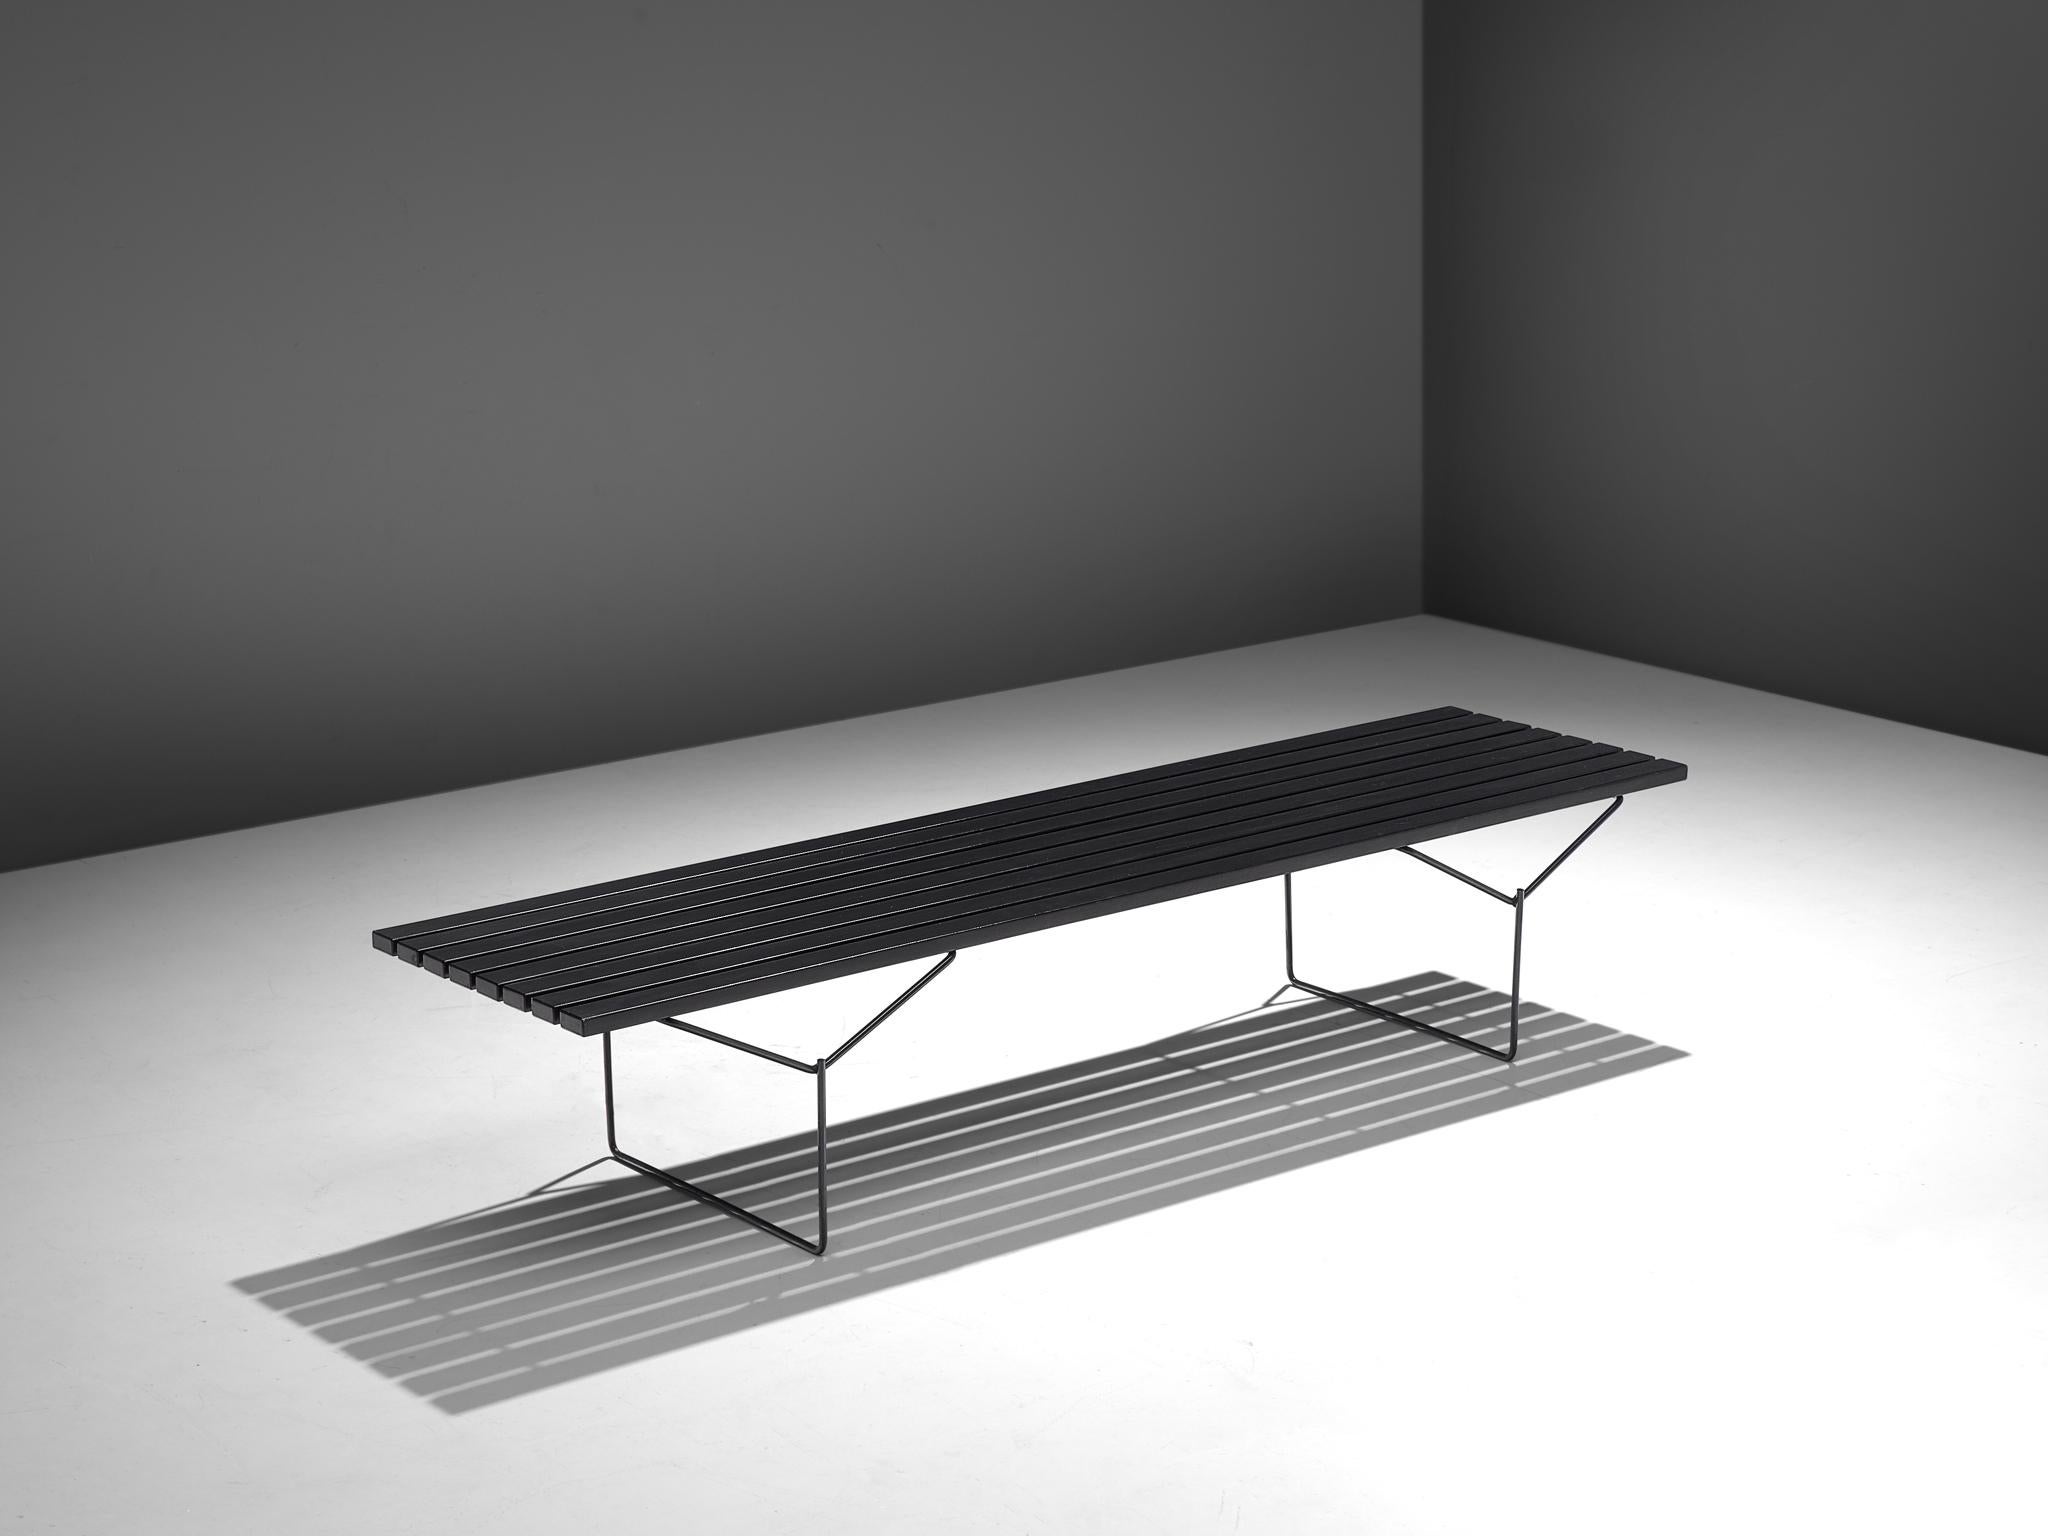 Harry Bertoia for Knoll, slat bench, beech and metal, United States, 1950s.

Simplistic early slat bench designed by Harry Bertoia, manufactured by Knoll, USA 1950s. The slats are black lacquered. This functional bench that can also be used as a